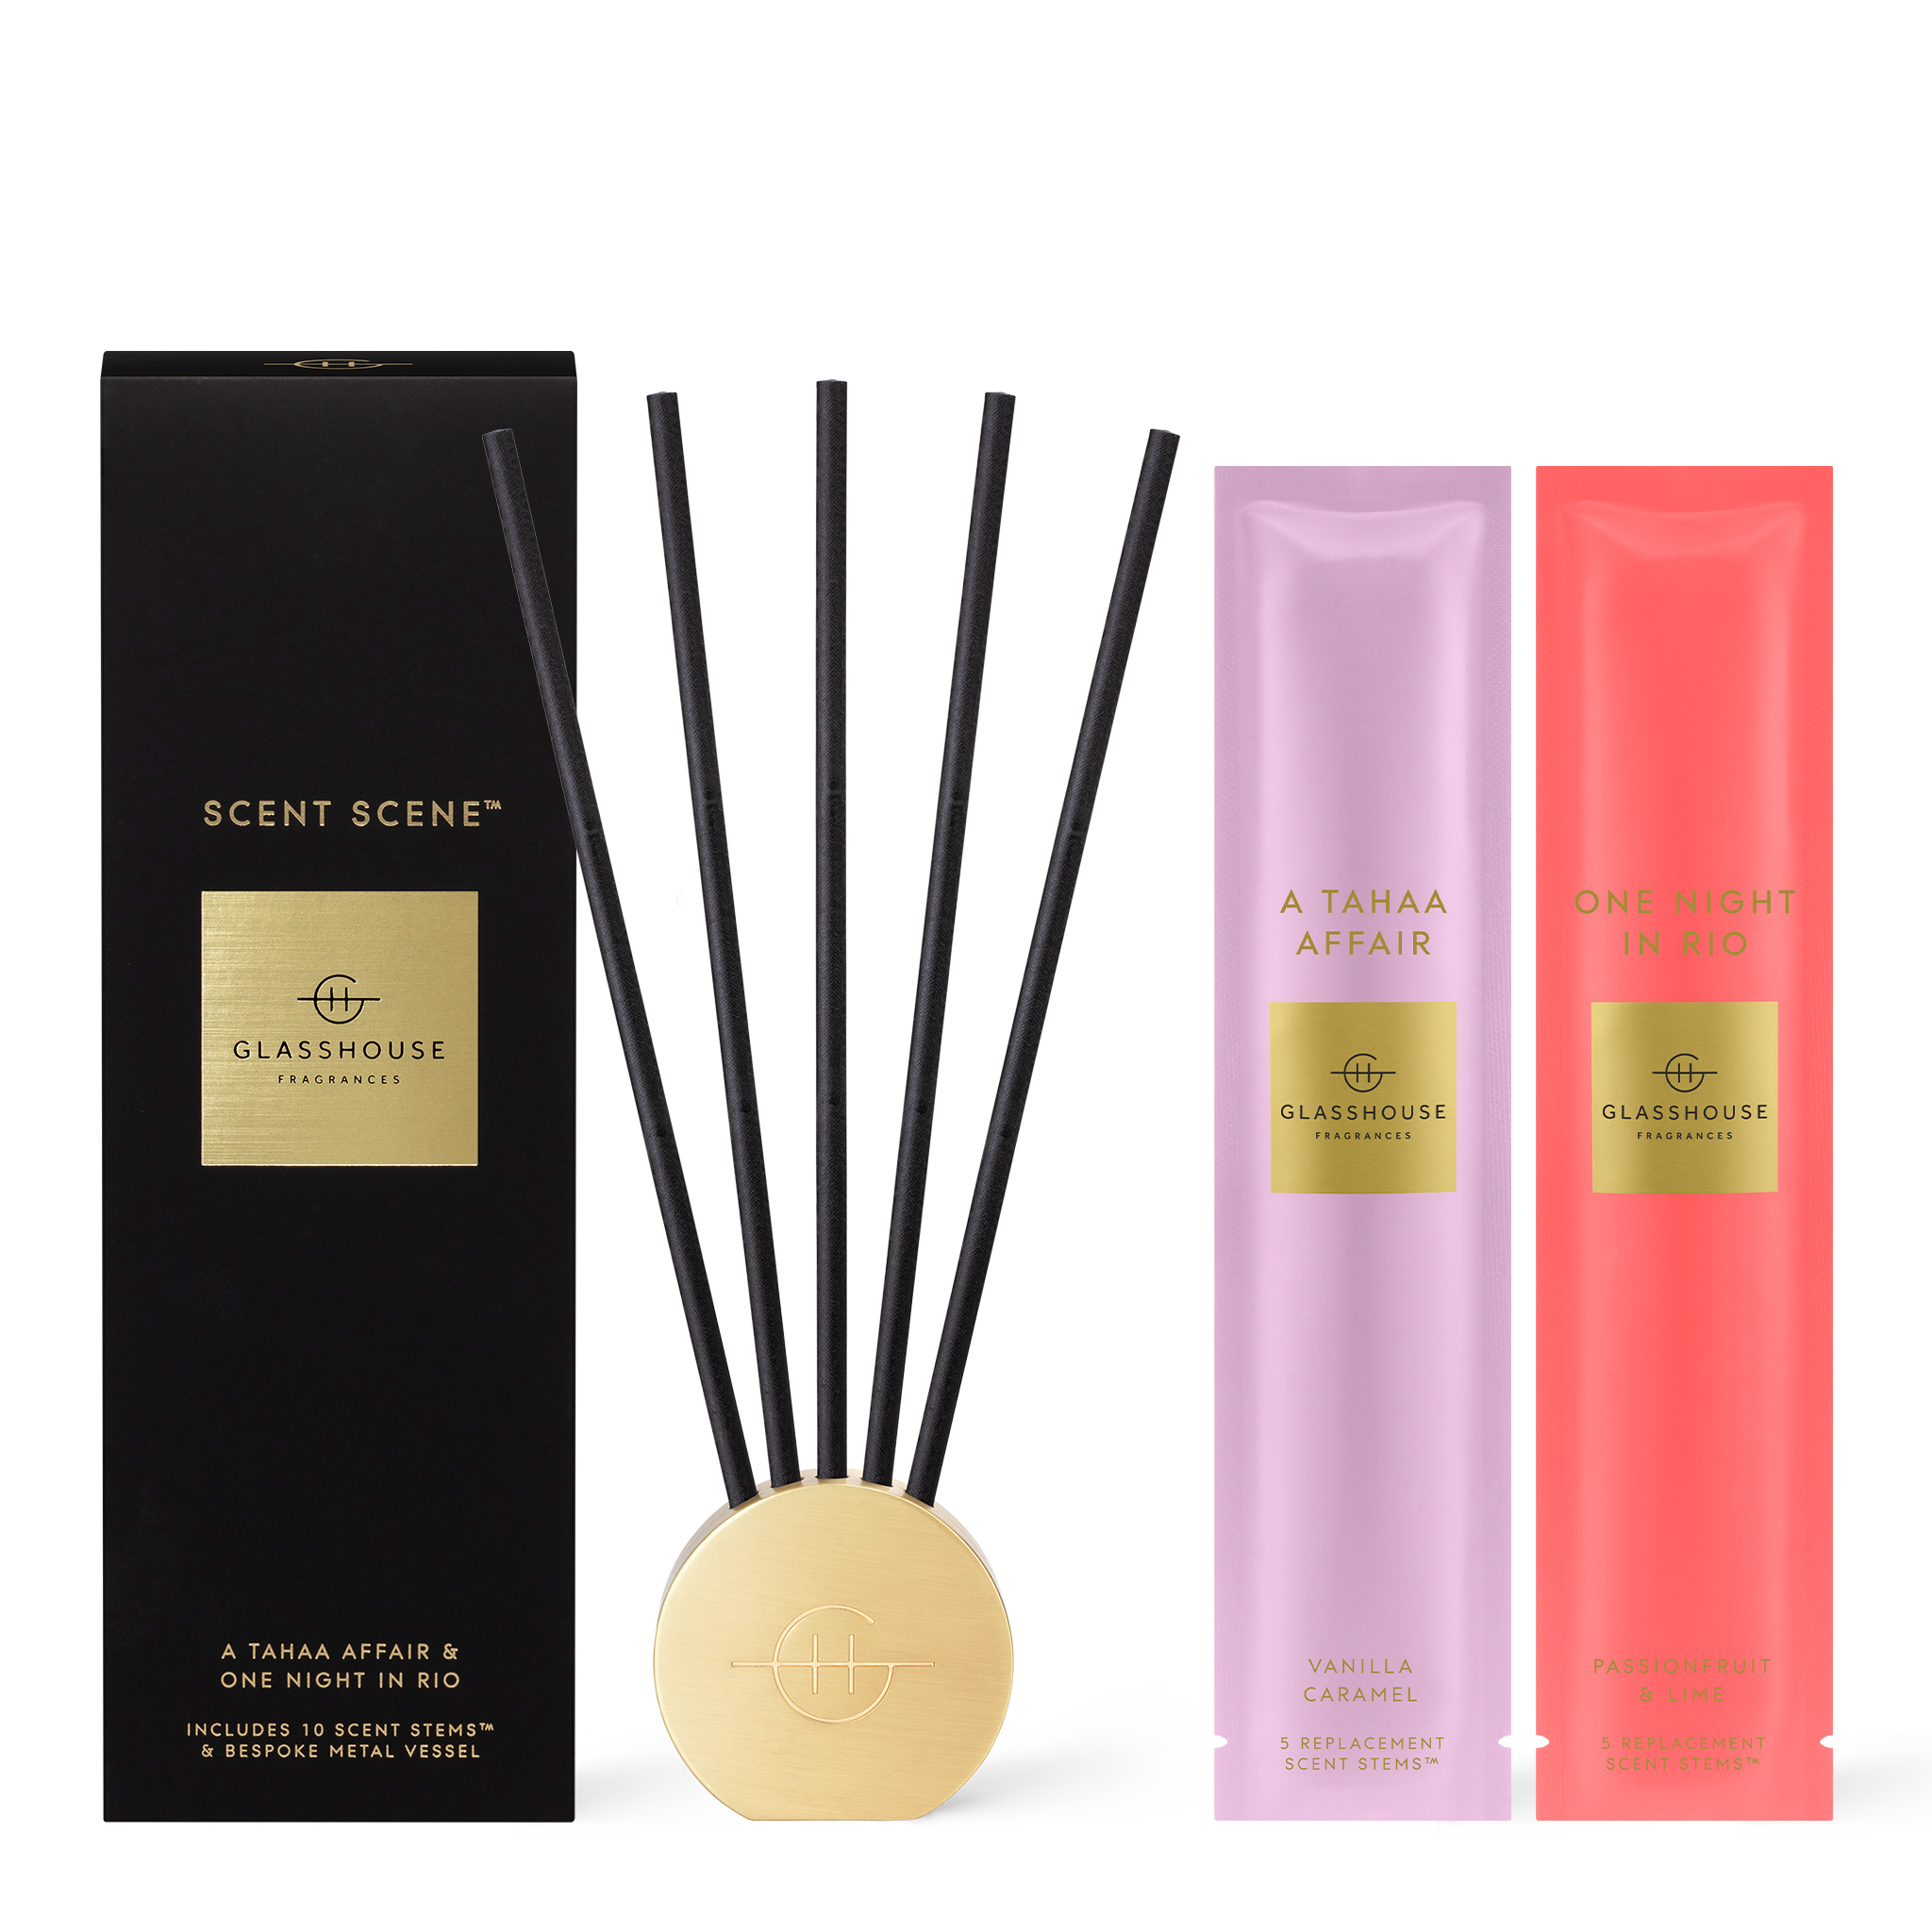 Glasshouse Fragrances A Tahaa Affair and One Night in Rio Scent Scene™ Liquidless Diffuser stand and stems with packaging